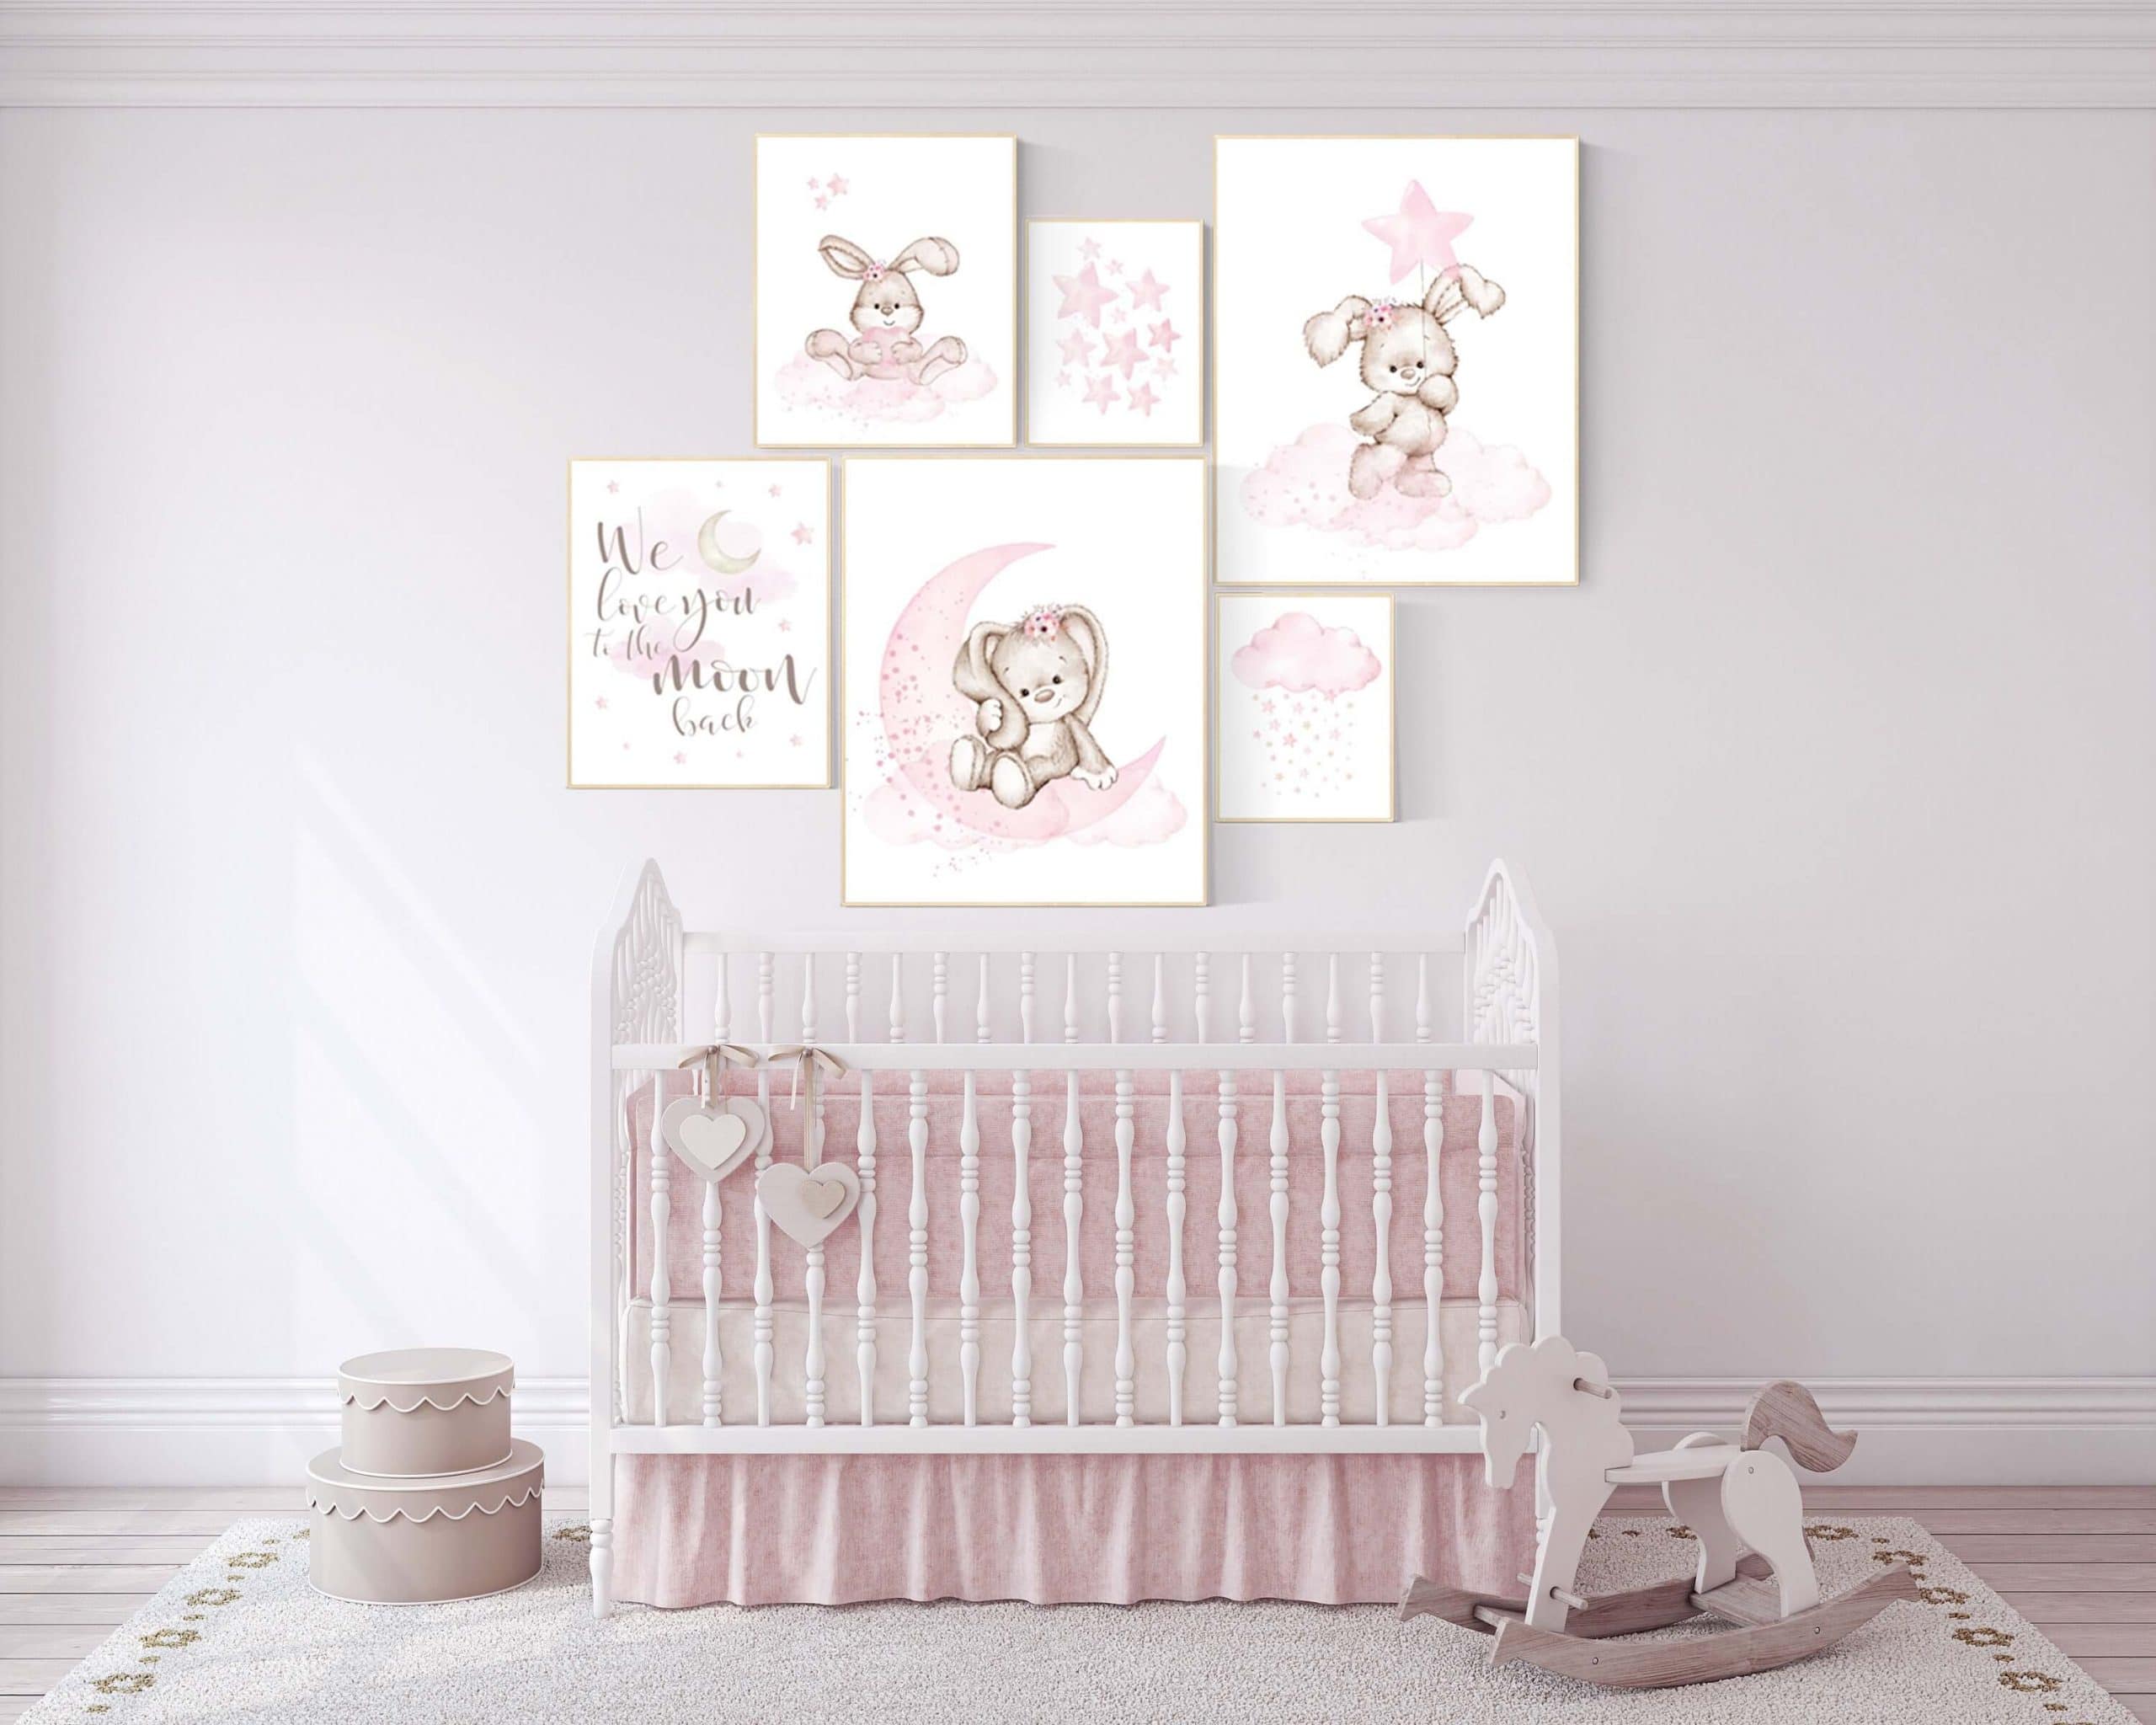 A baby girl's nursery with pink and white decor
